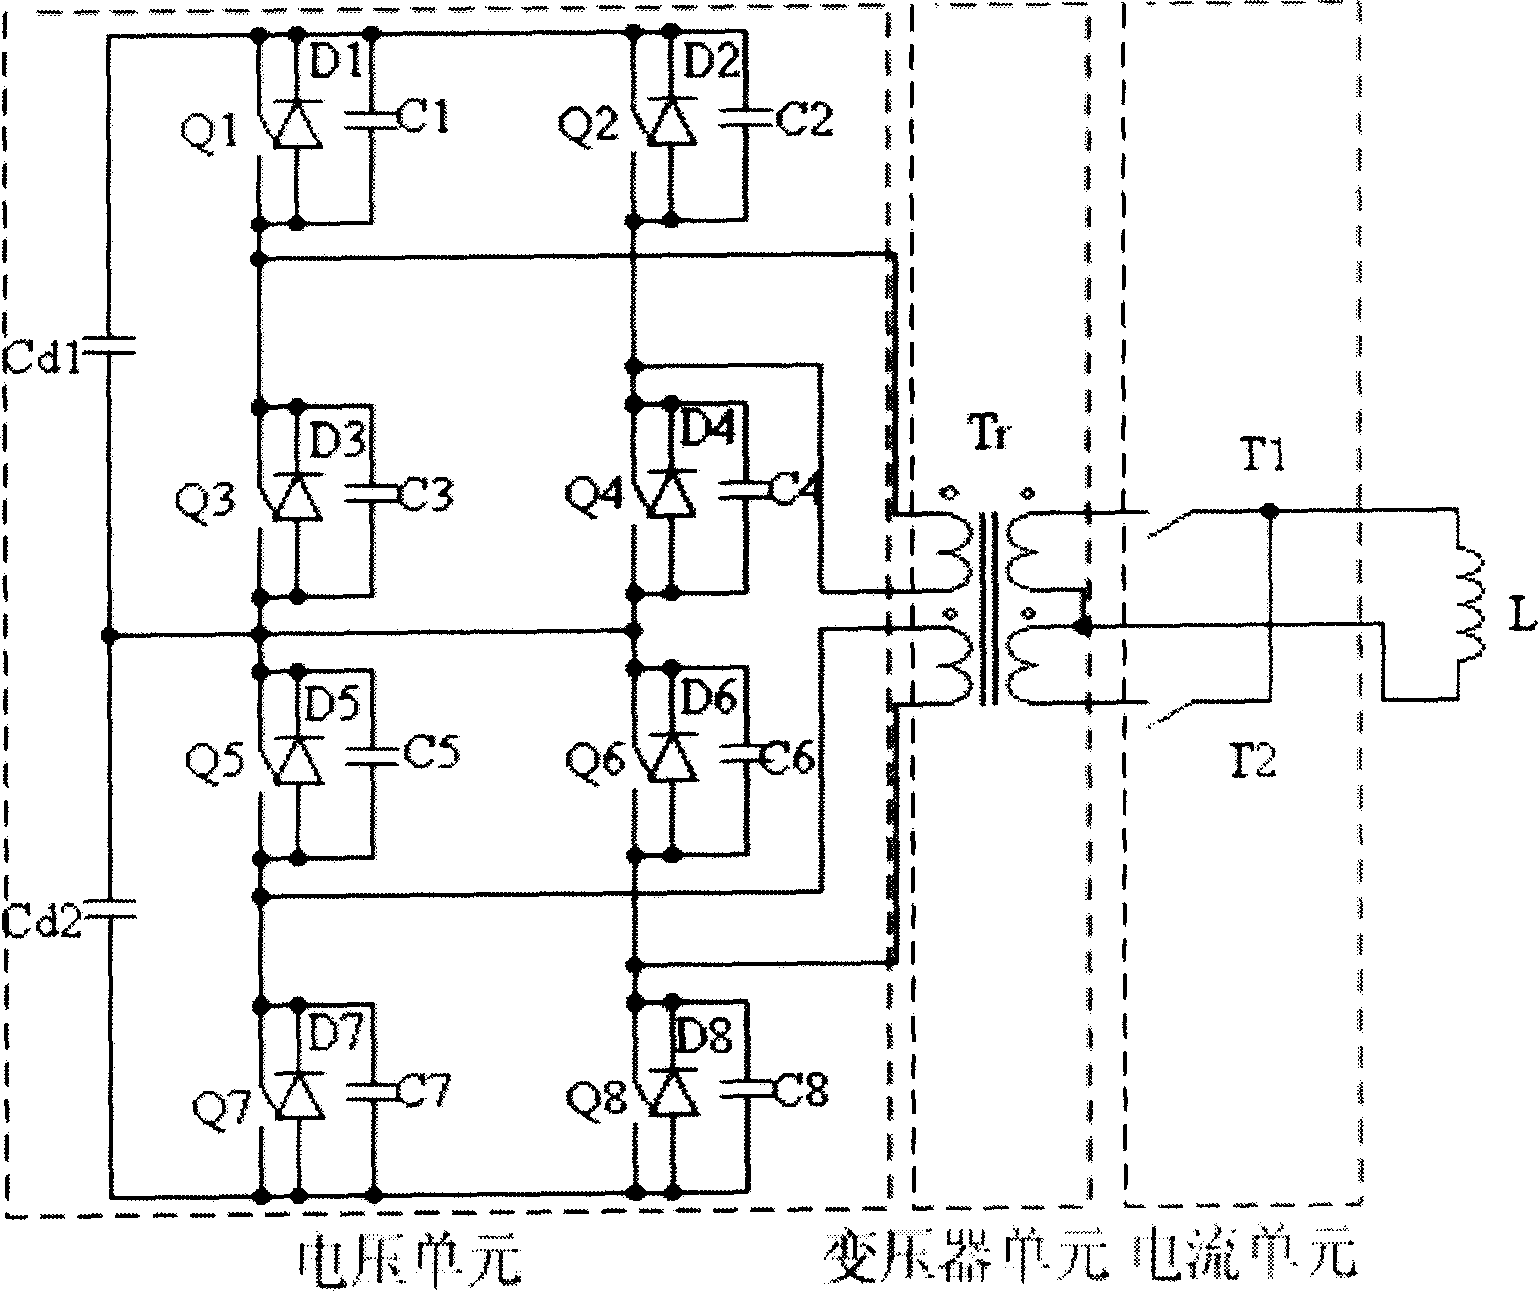 Bidirectional multi-level soft switch DC/DC for superconducting energy storage and its voltage side phase-shift controlling method